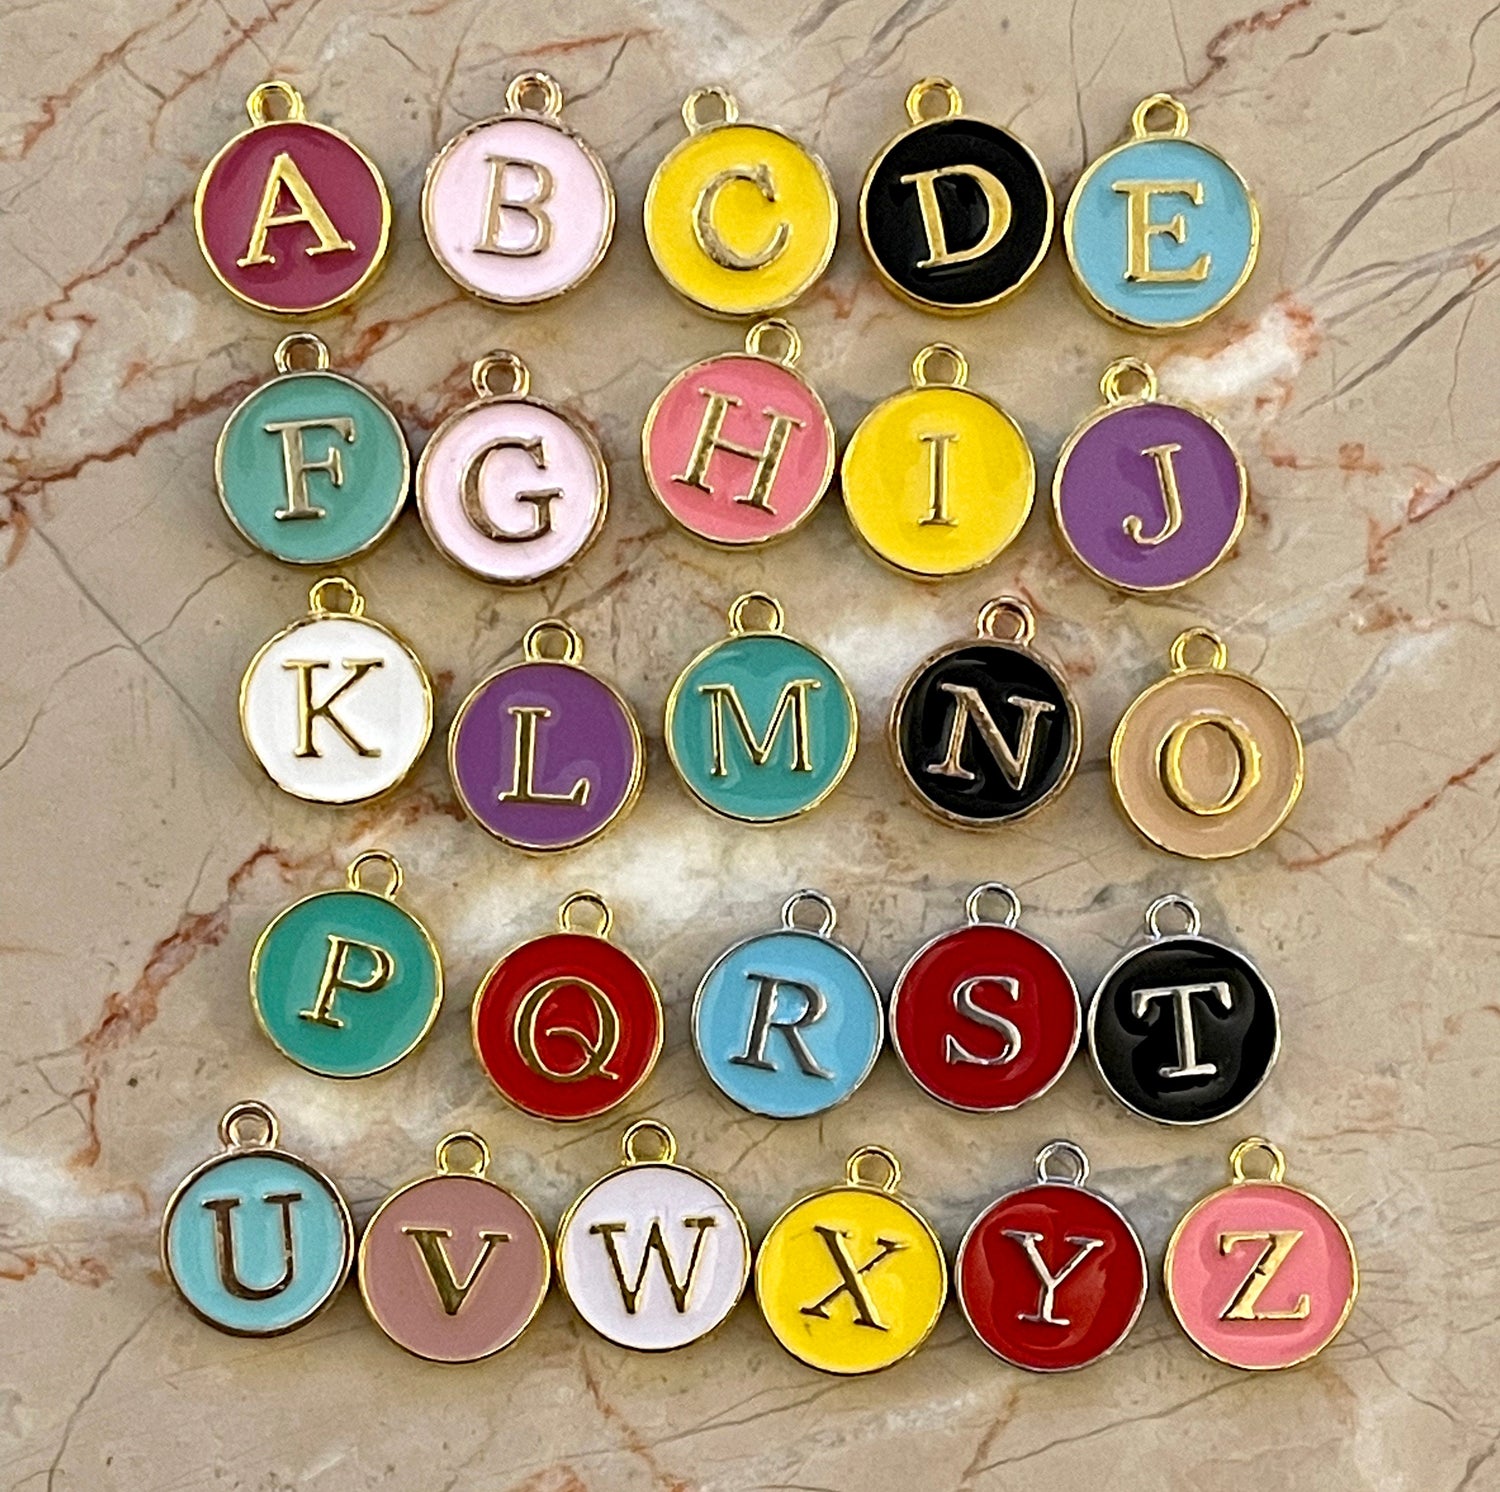 Letter charms–choose black, white, blue, pink, red, yellow, purple or